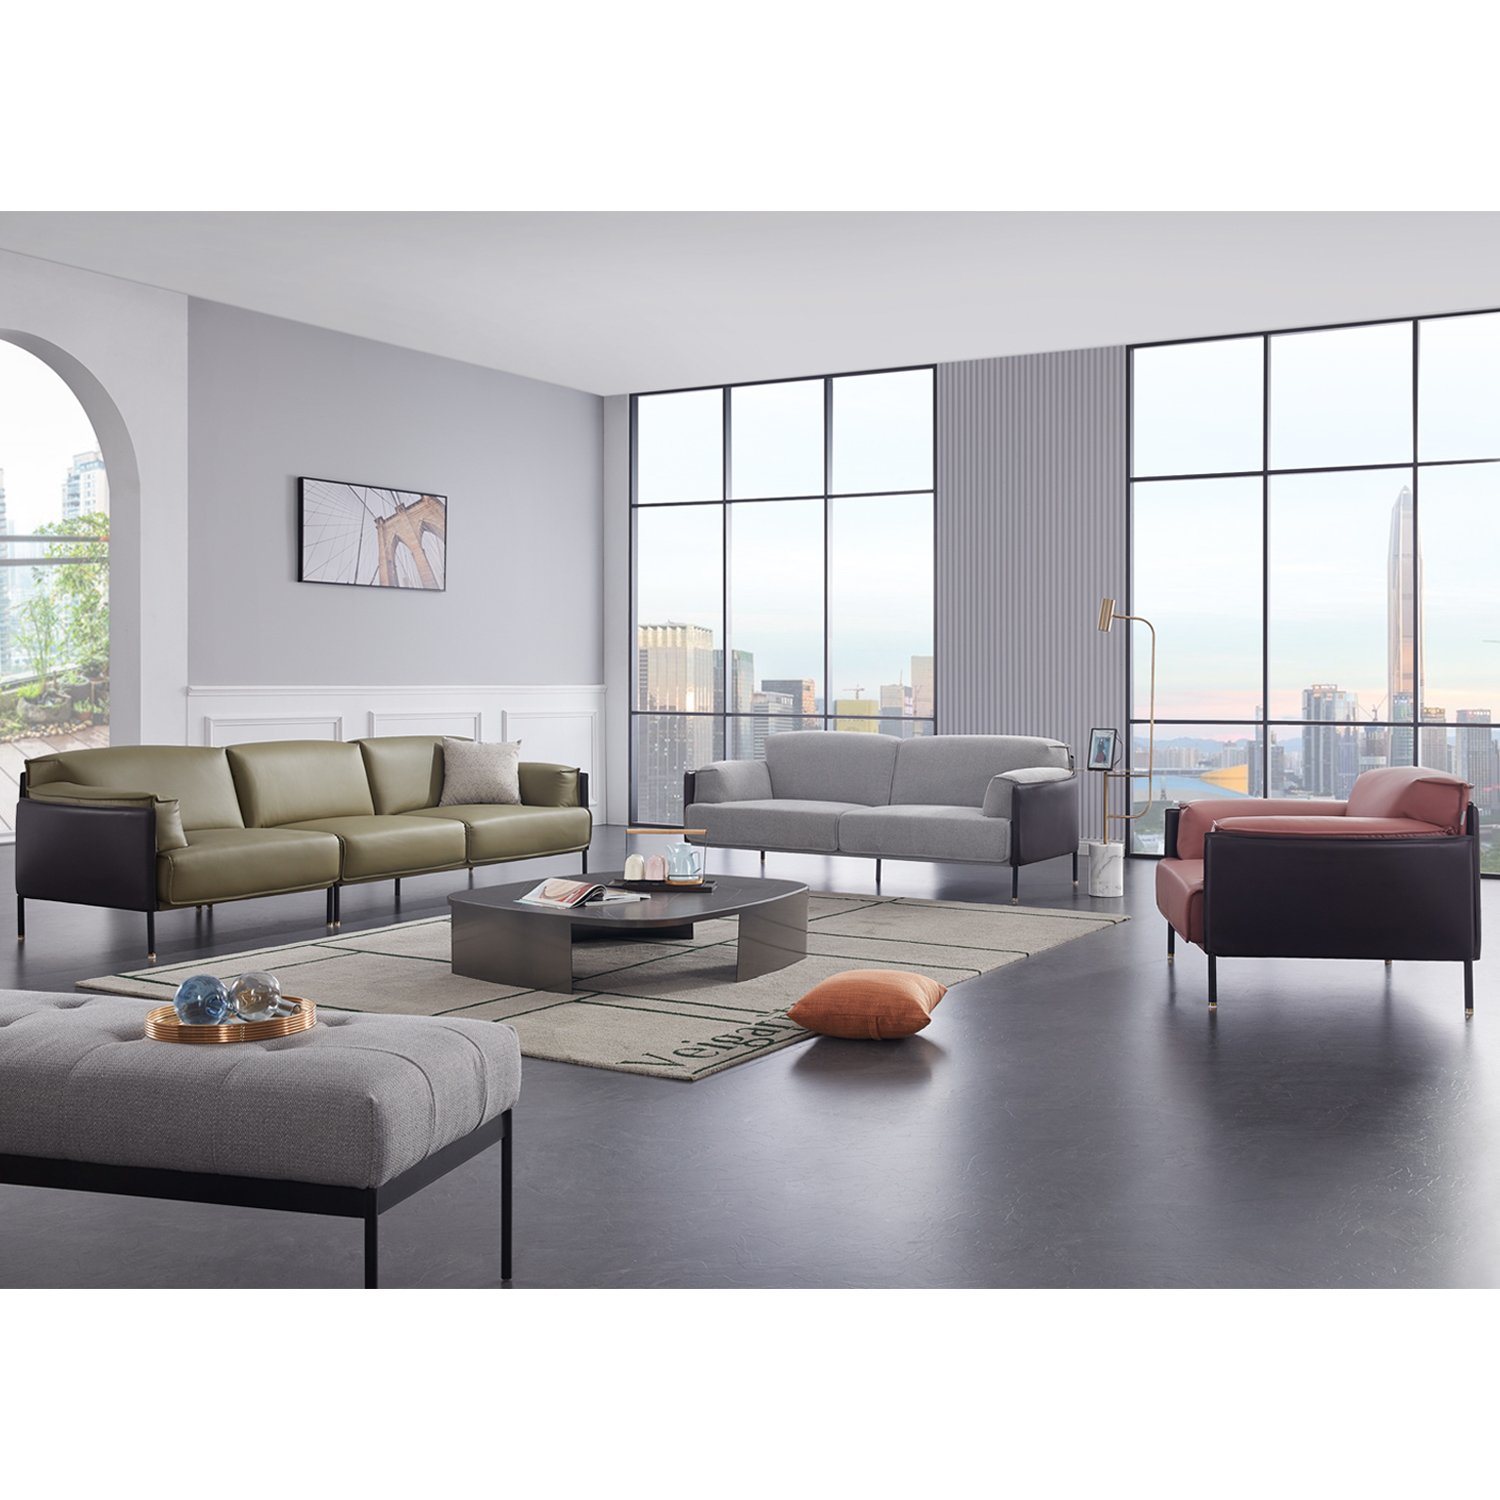 Modern Design Home Furniture Living Room 4 Seater High Quality Leather Sofa